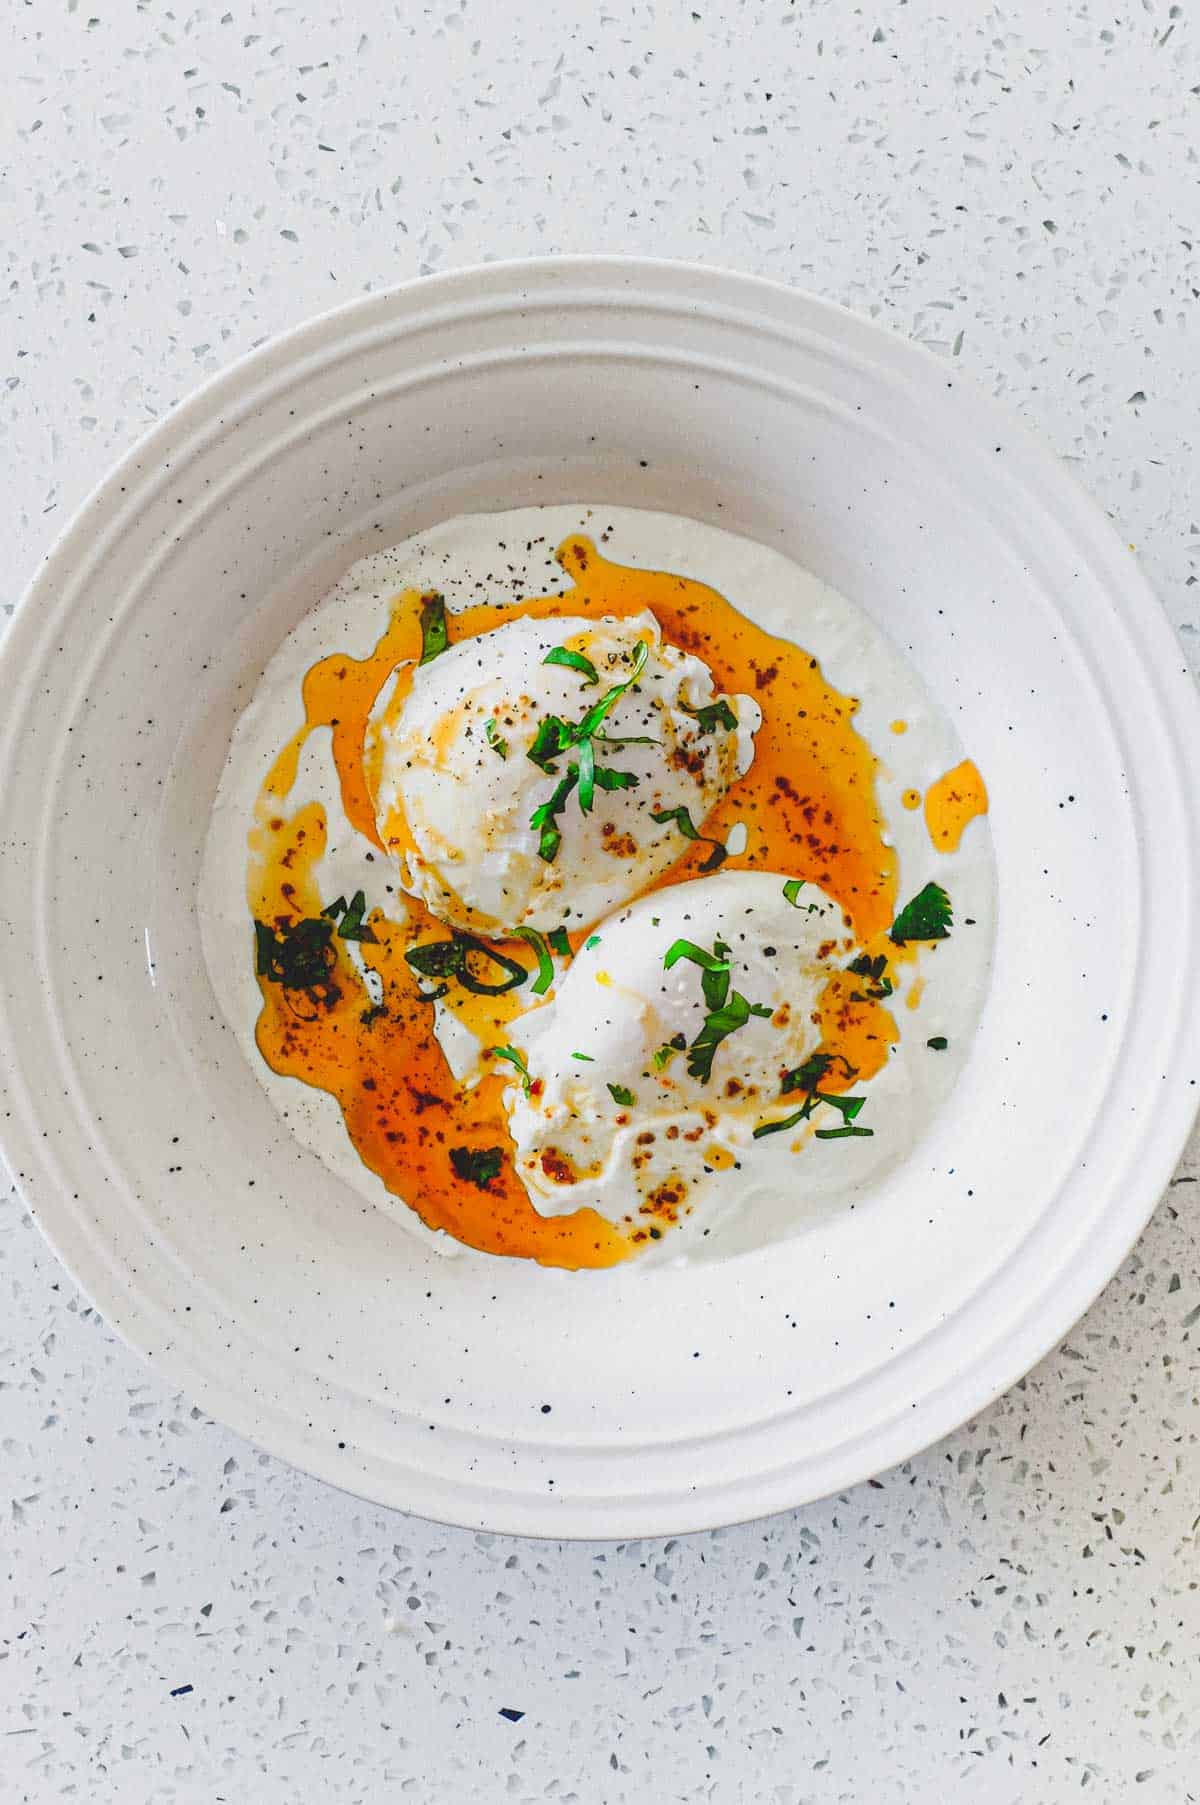 A small bowl of Turkish Cilbir (poached eggs) drizzled in orange Aleppo pepper butter